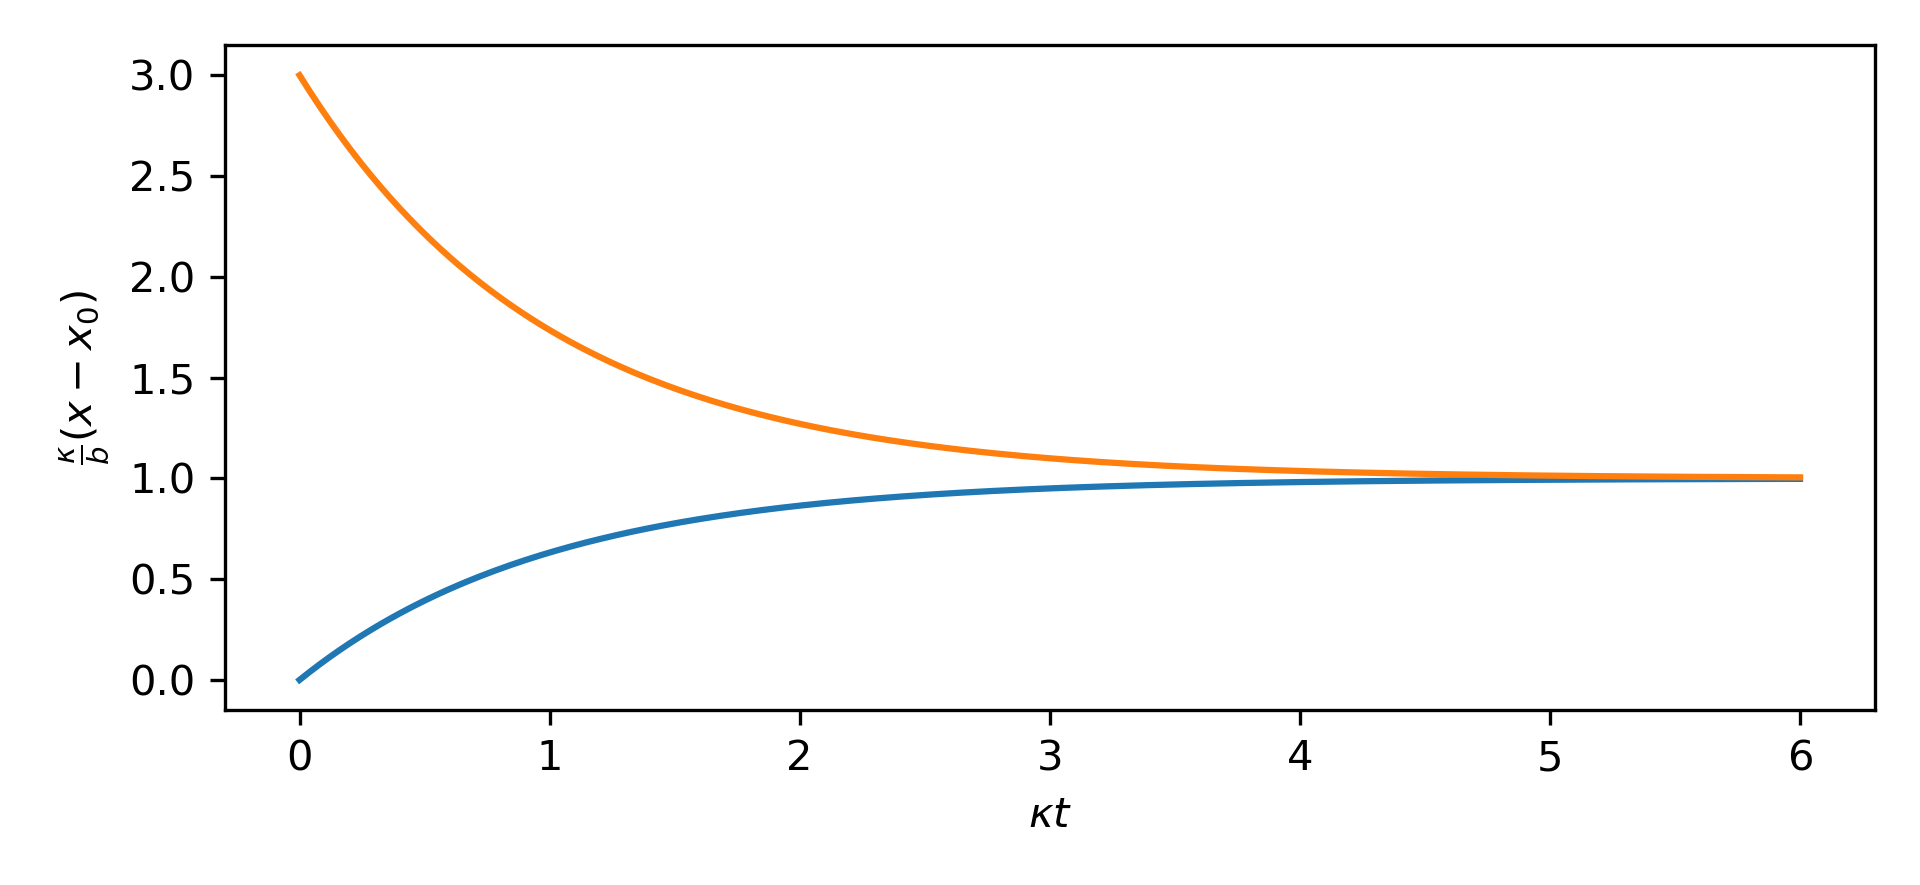 Simple exponential relexation.